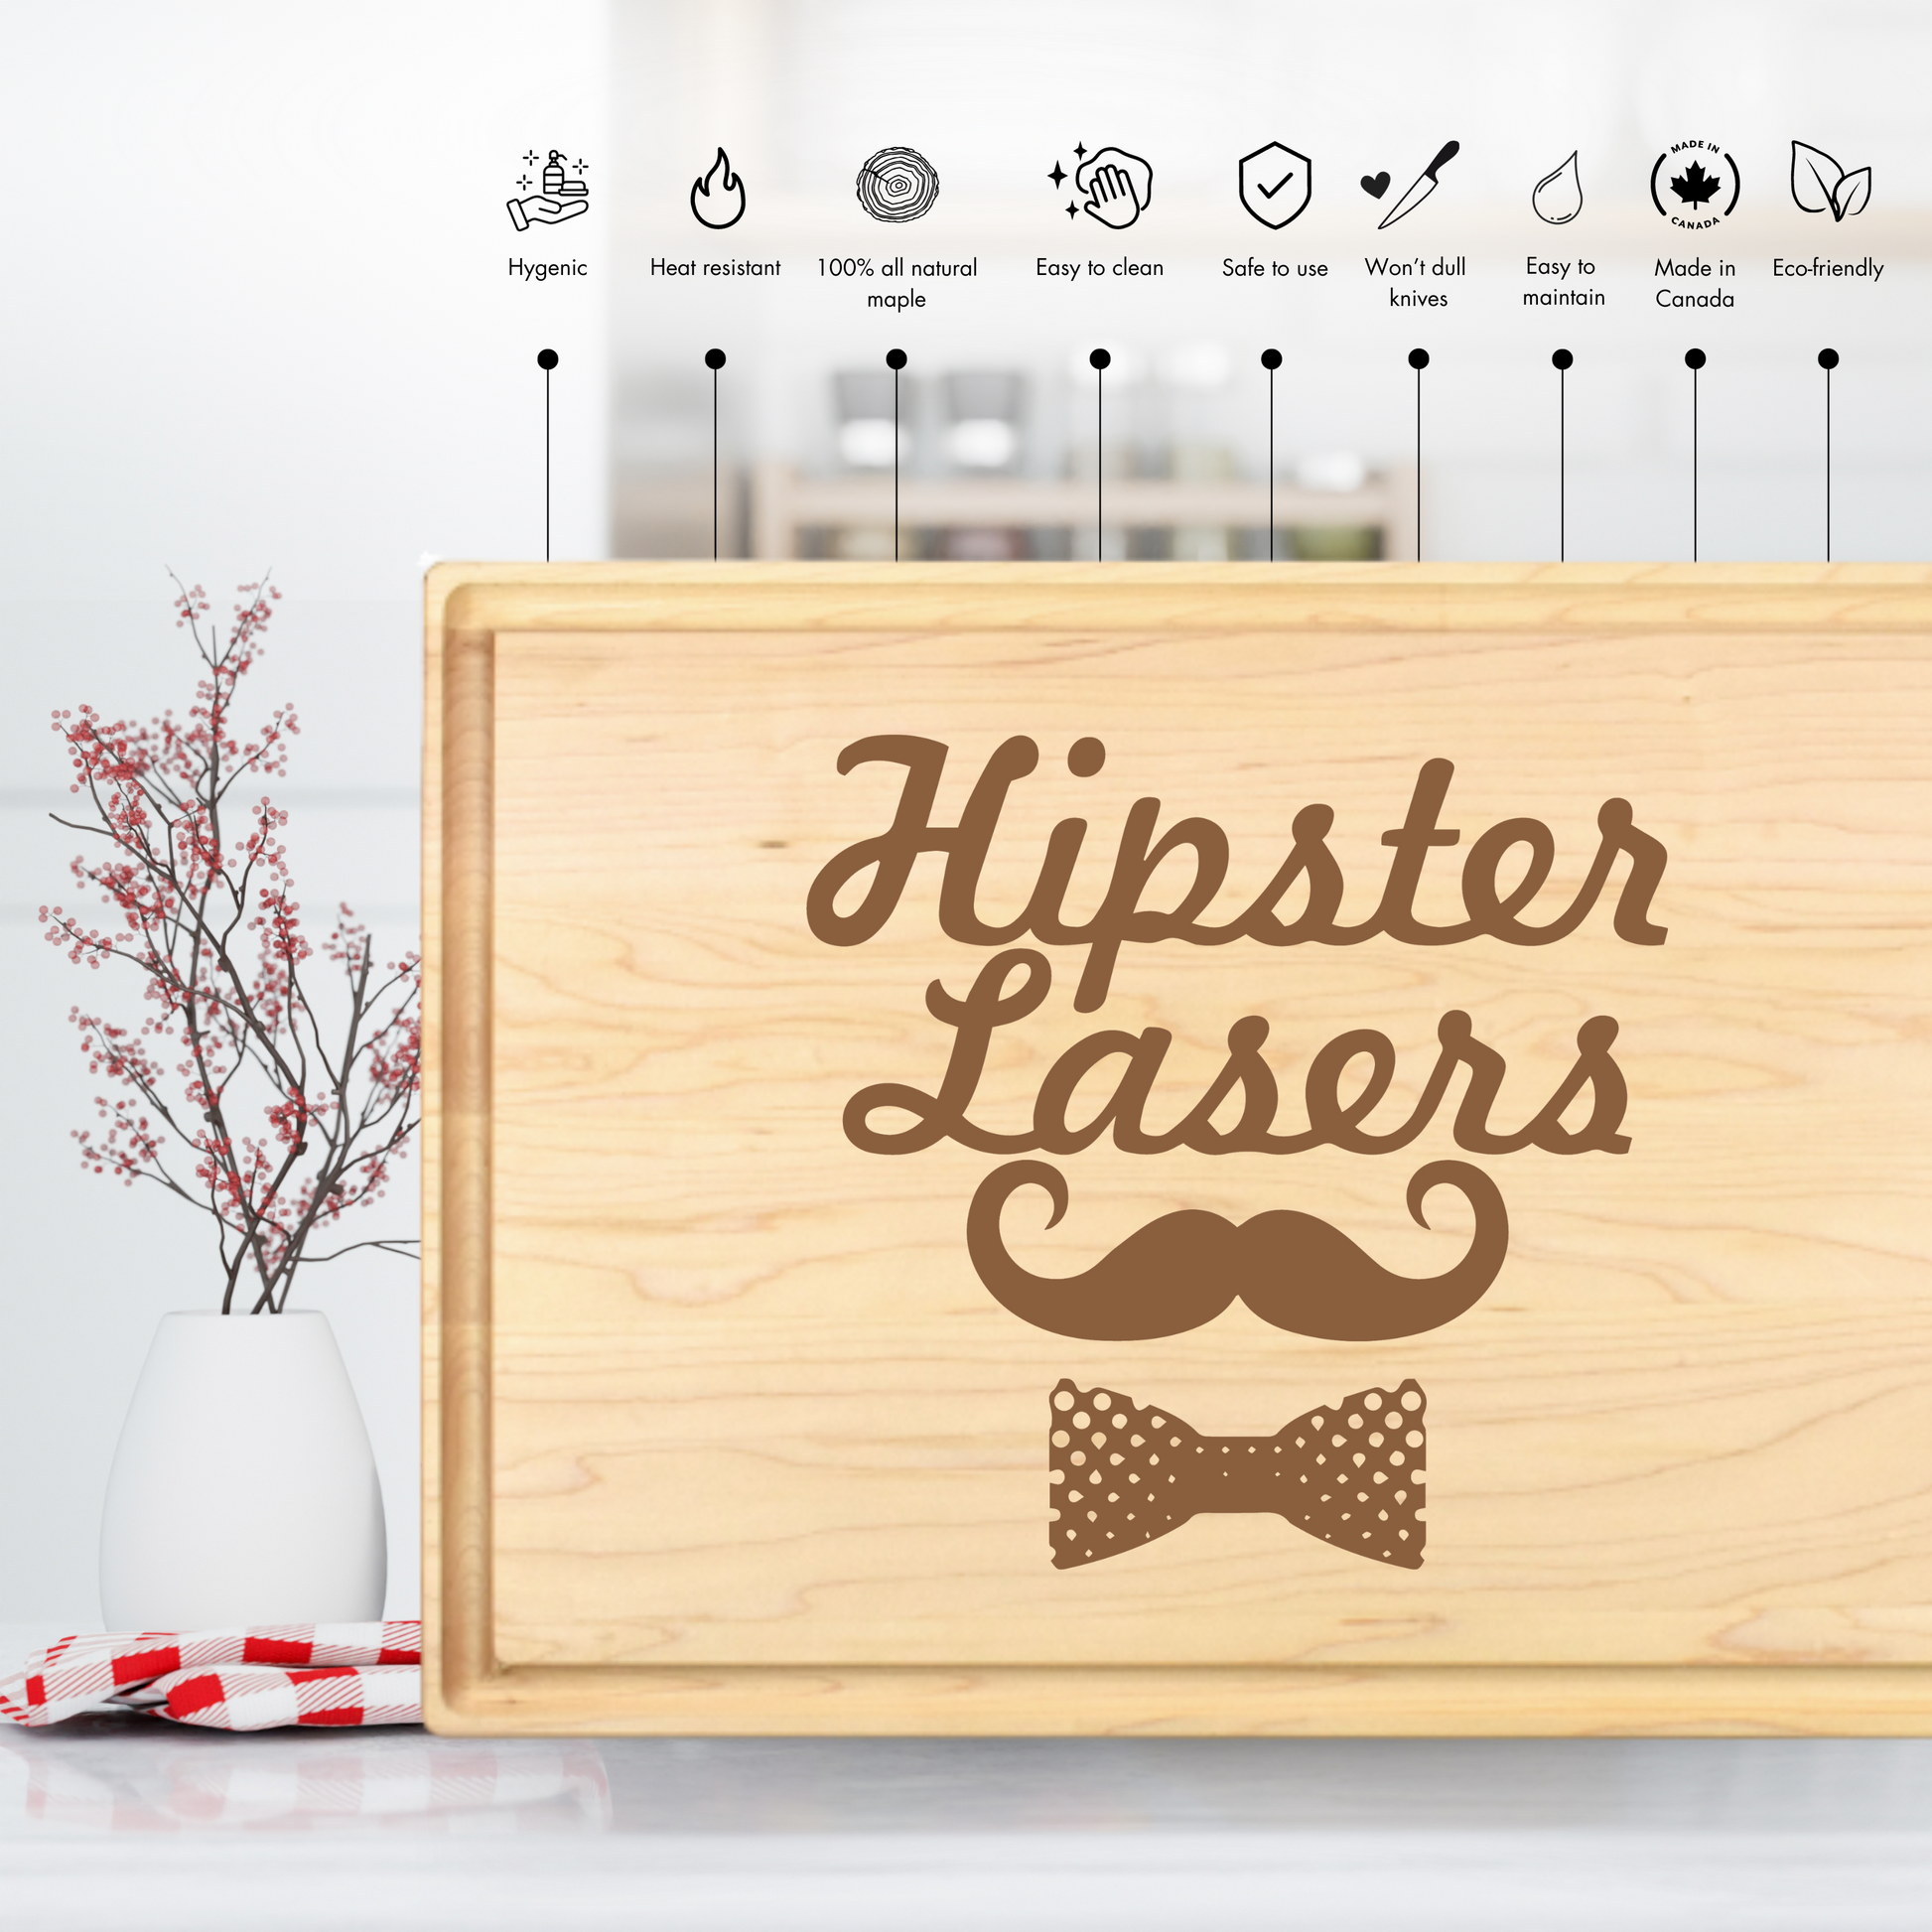 Vegetable Murder Board Cutting Board - Premium Cutting Boards from Hipster Lasers - Just $40! Shop now at Hipster Lasers